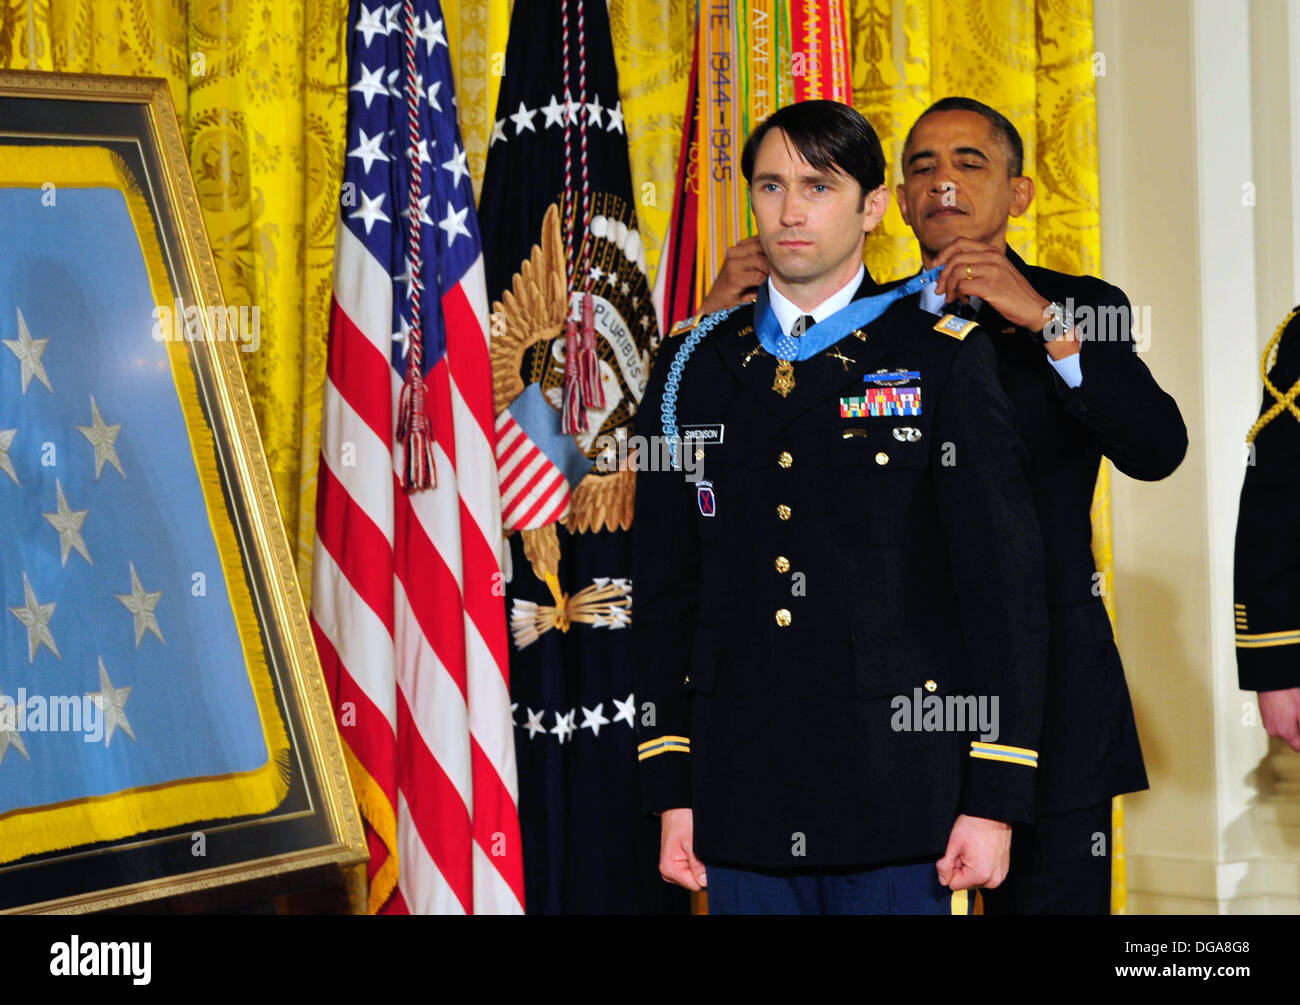 US President Barack Obama presents former US Army Capt. William D. Swenson with the Medal of Honor during a ceremony in the East Room of the White House October 15, 2013 in Washington, DC. The Medal of Honor is the nation's highest military honor. Stock Photo